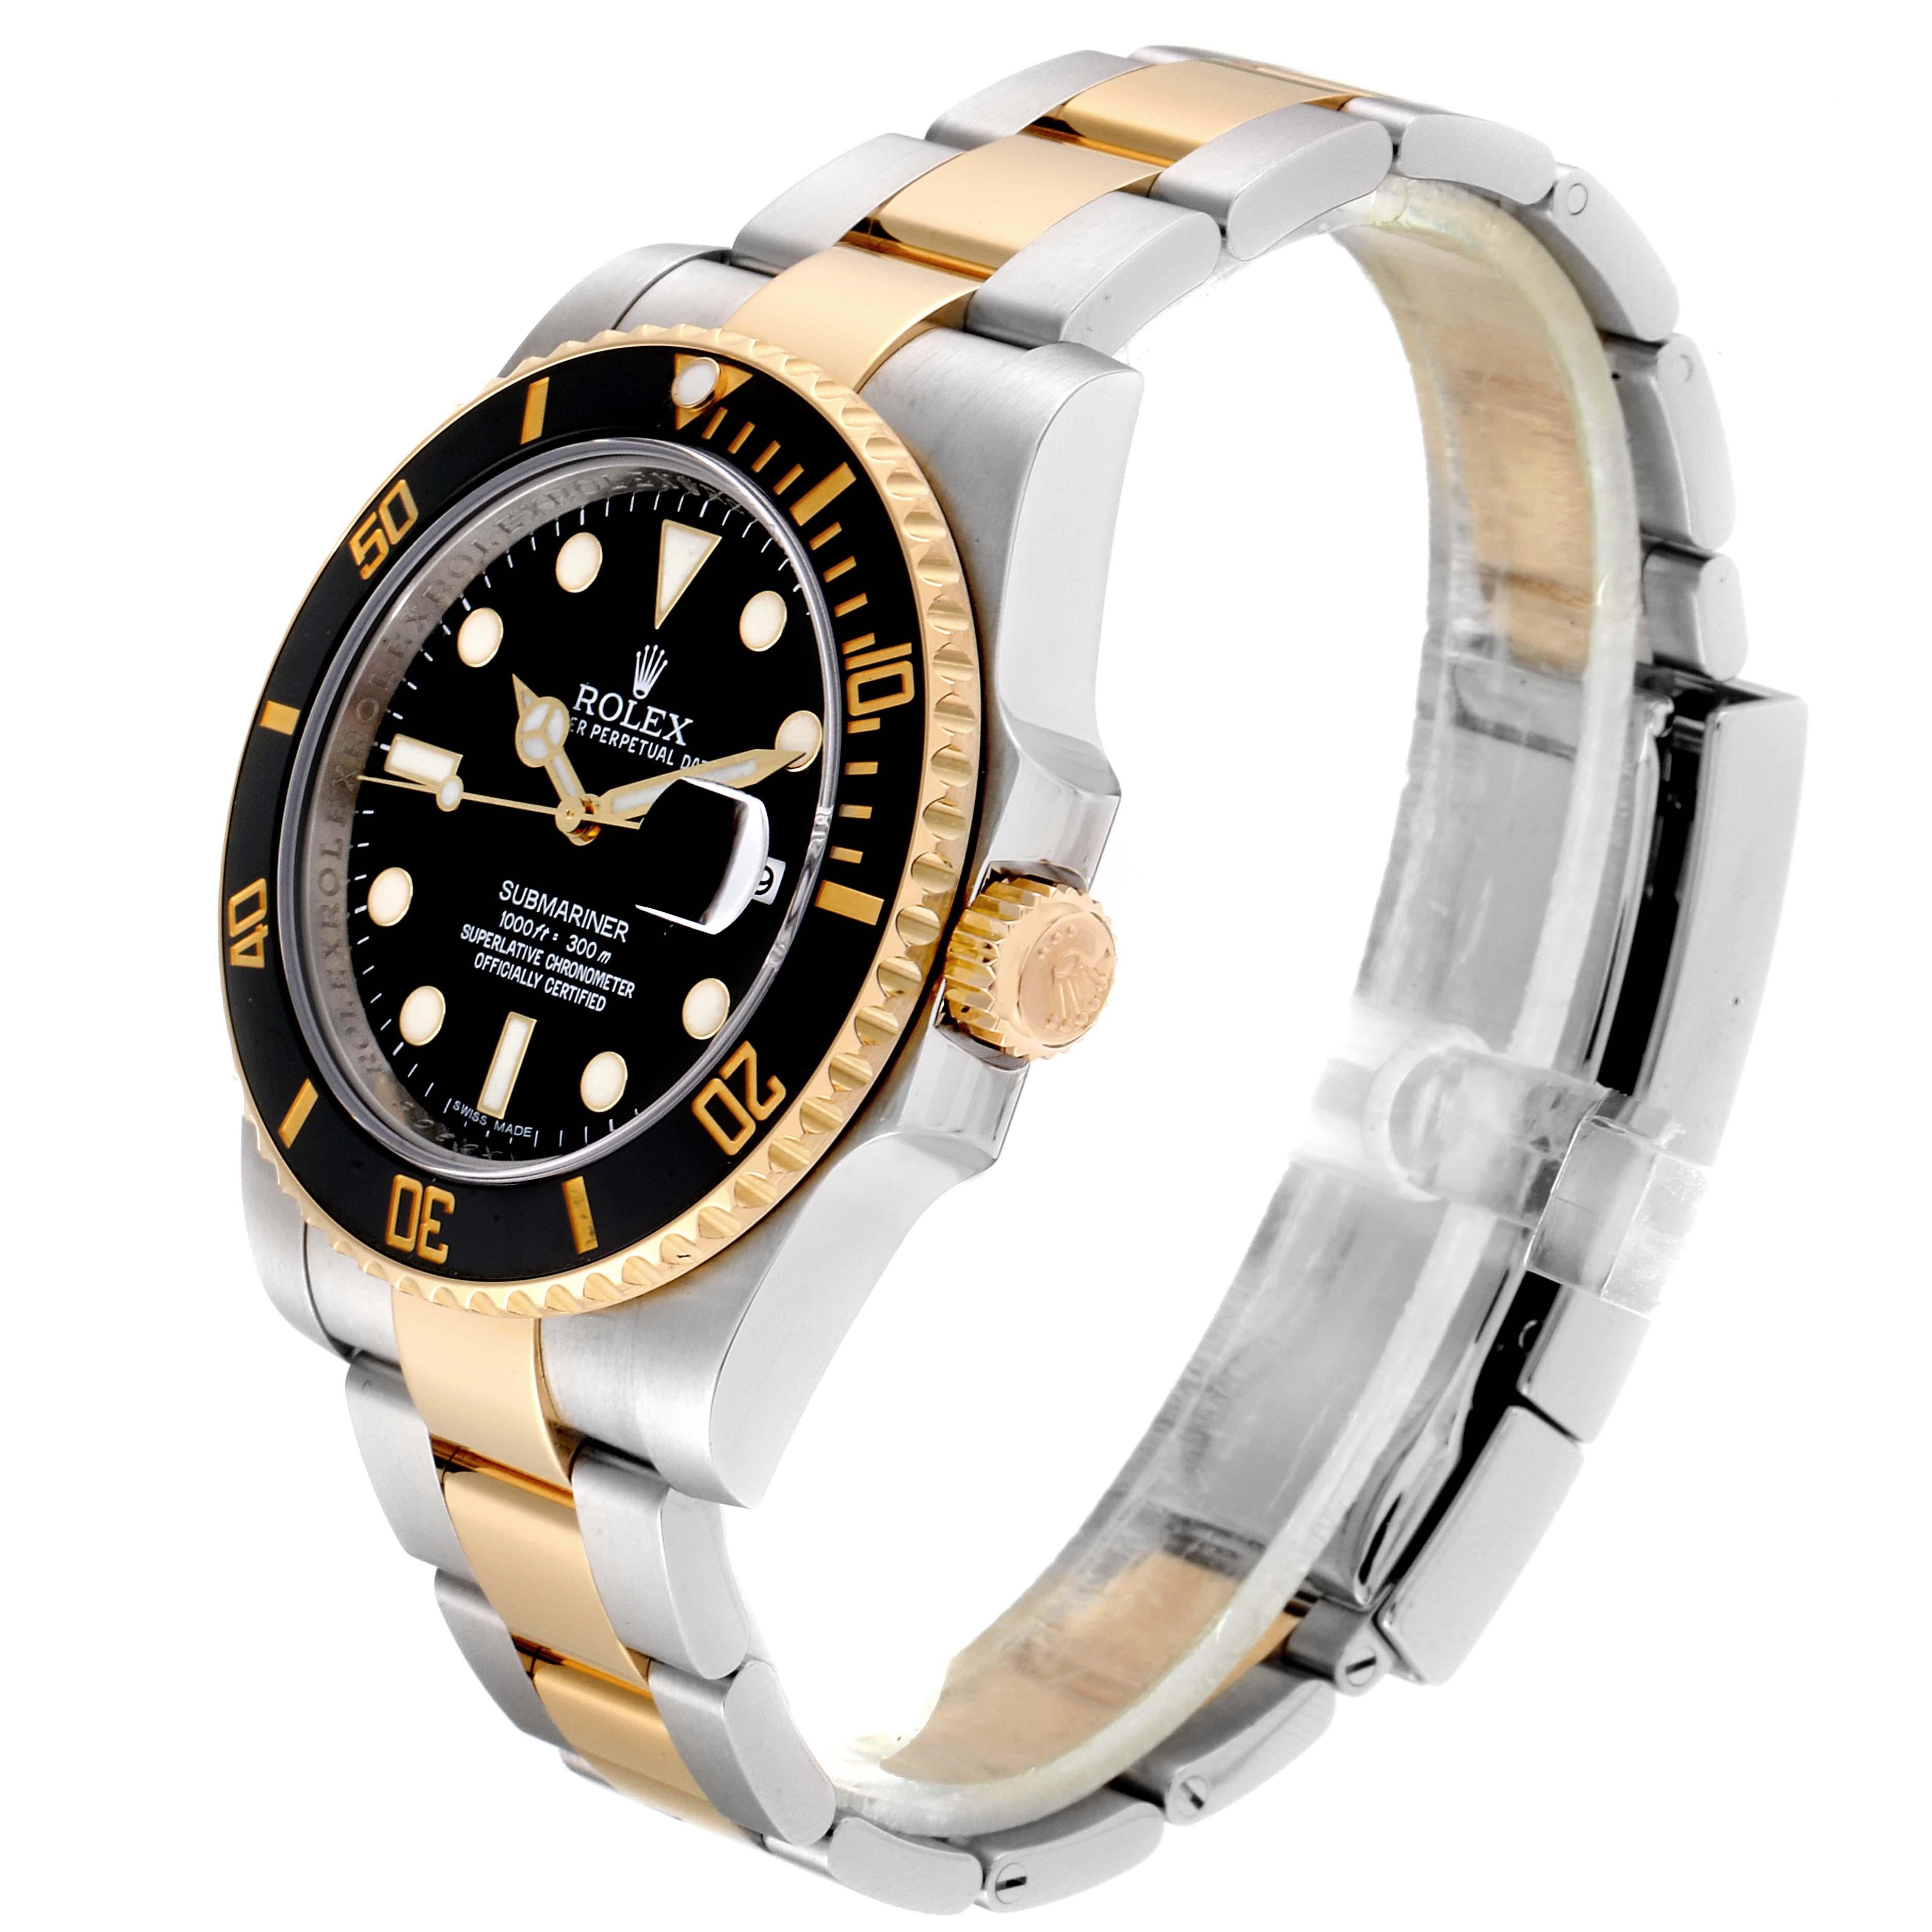 Rolex Submariner Steel Yellow Gold Black Dial Automatic Men's Watch 116613 For Sale 1